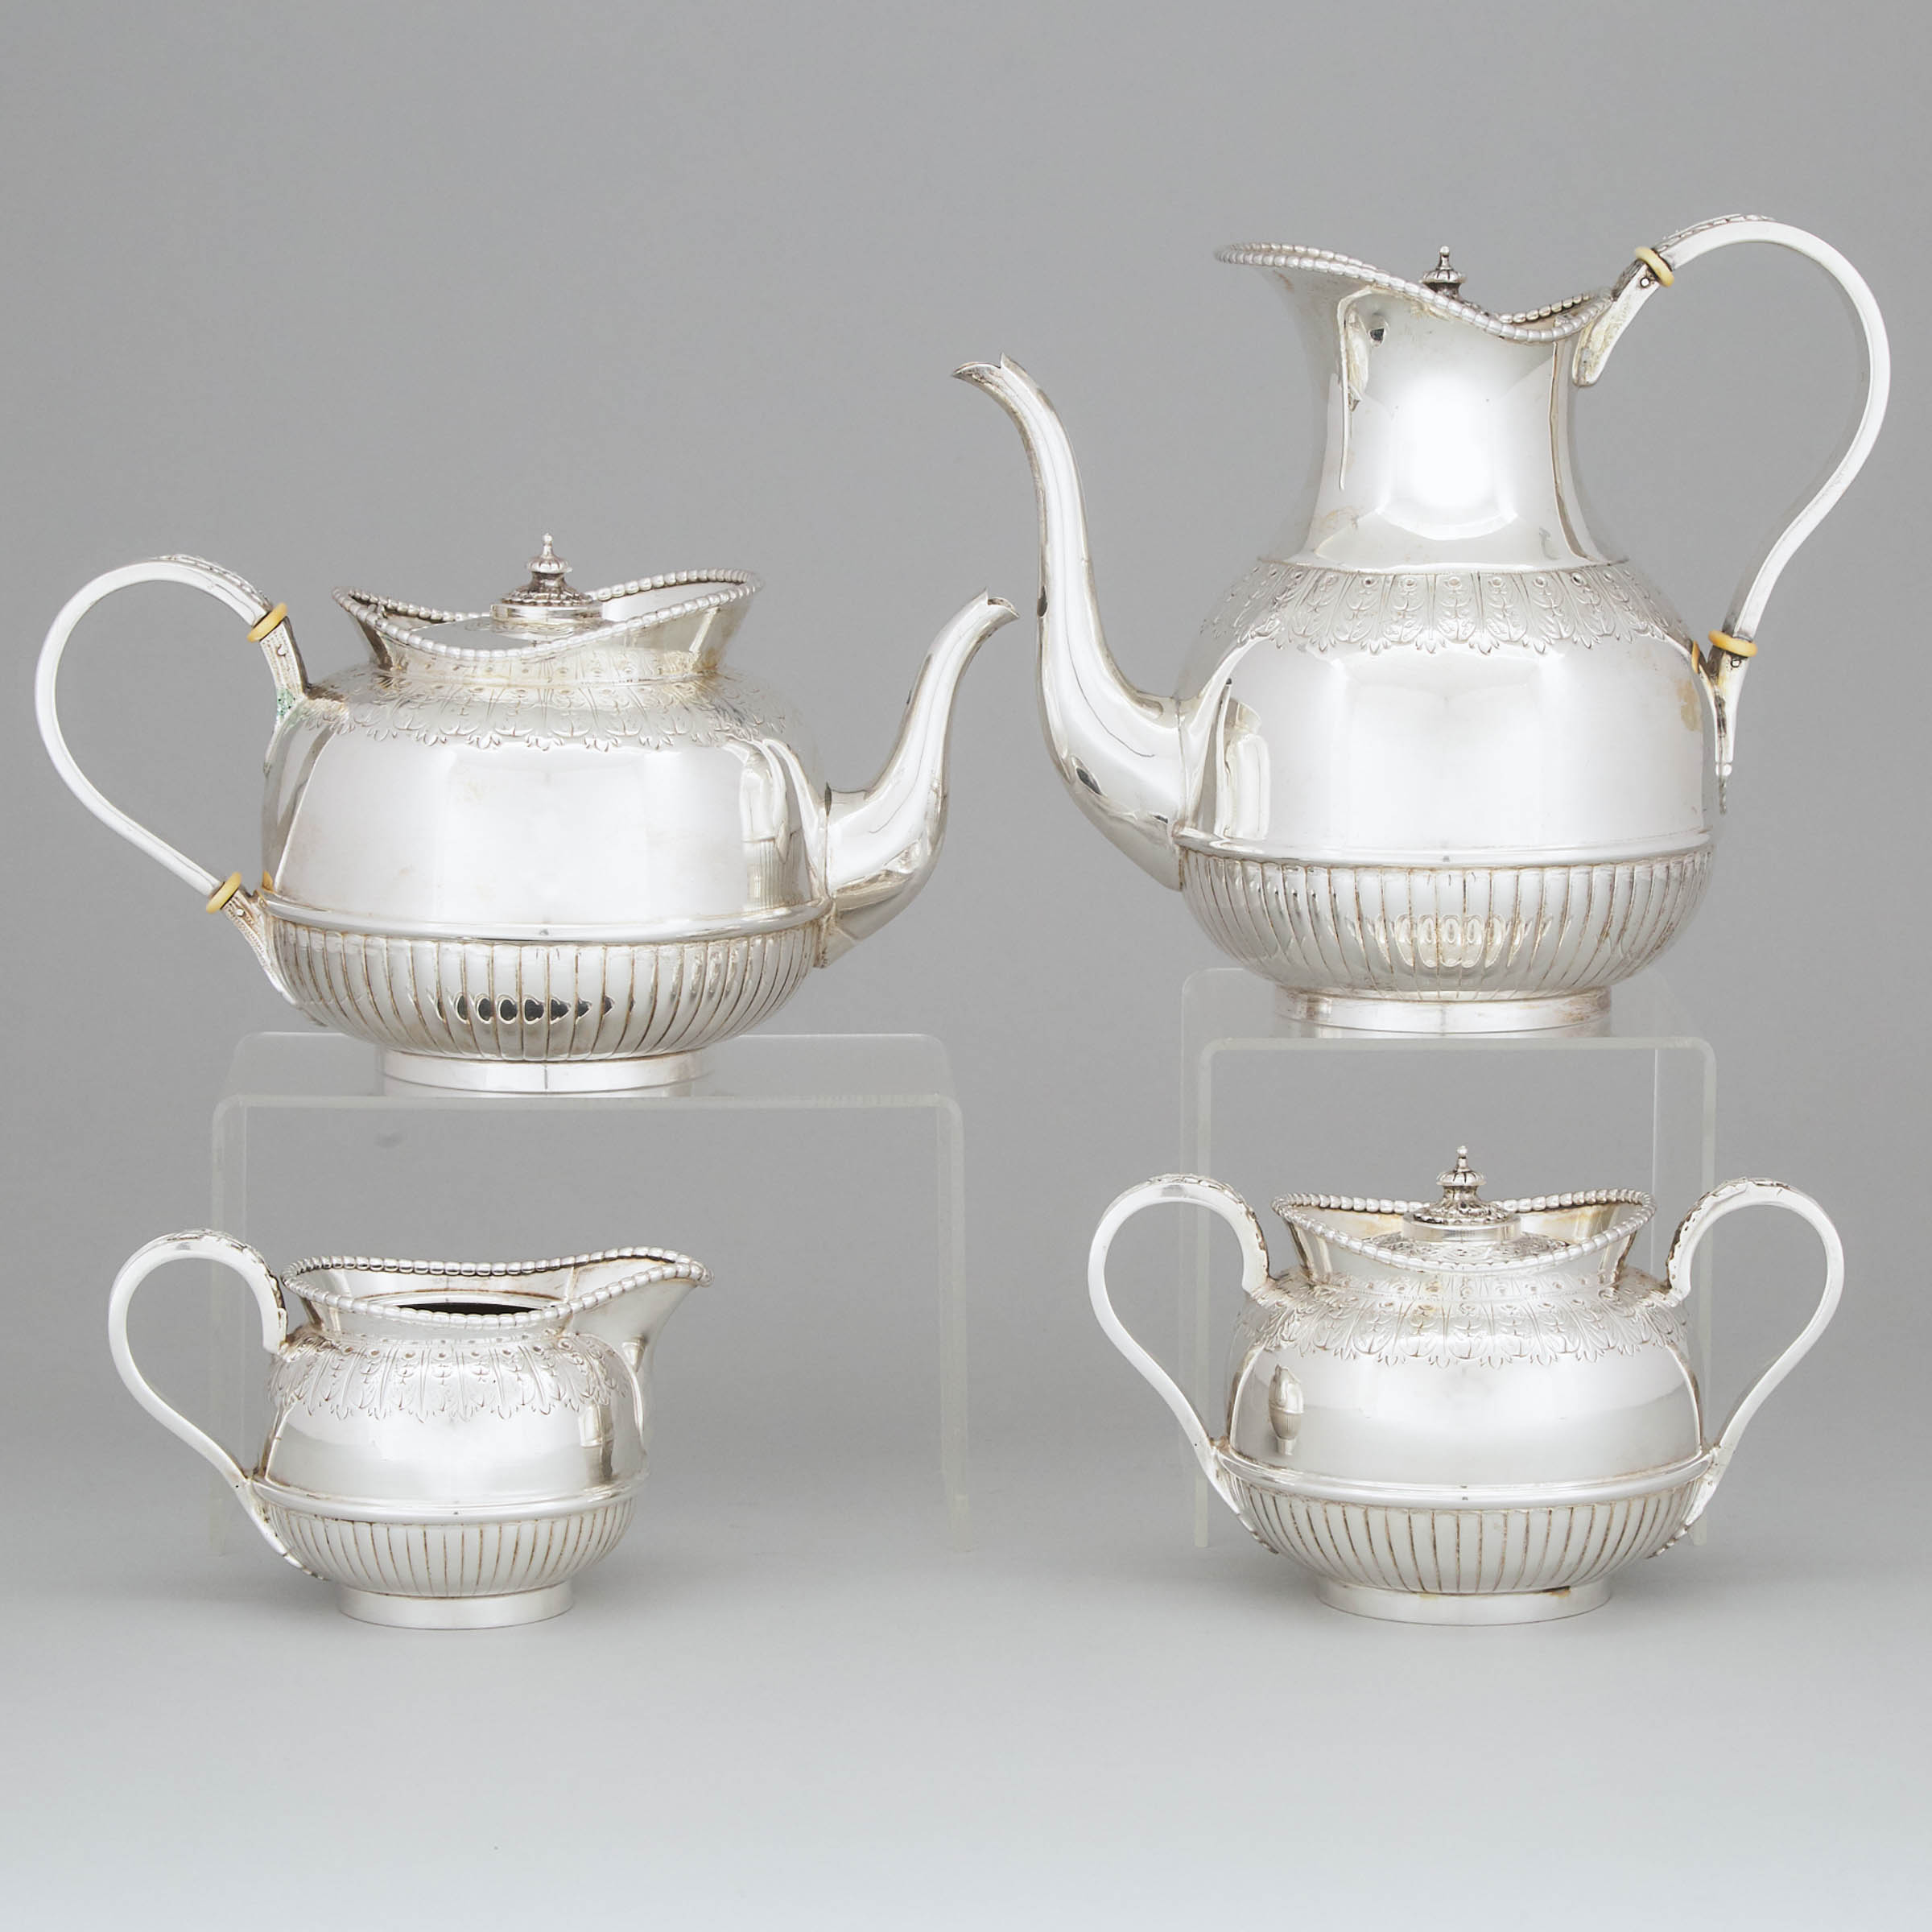 Silver Tea and Coffee Service, probably Russian, 20th century